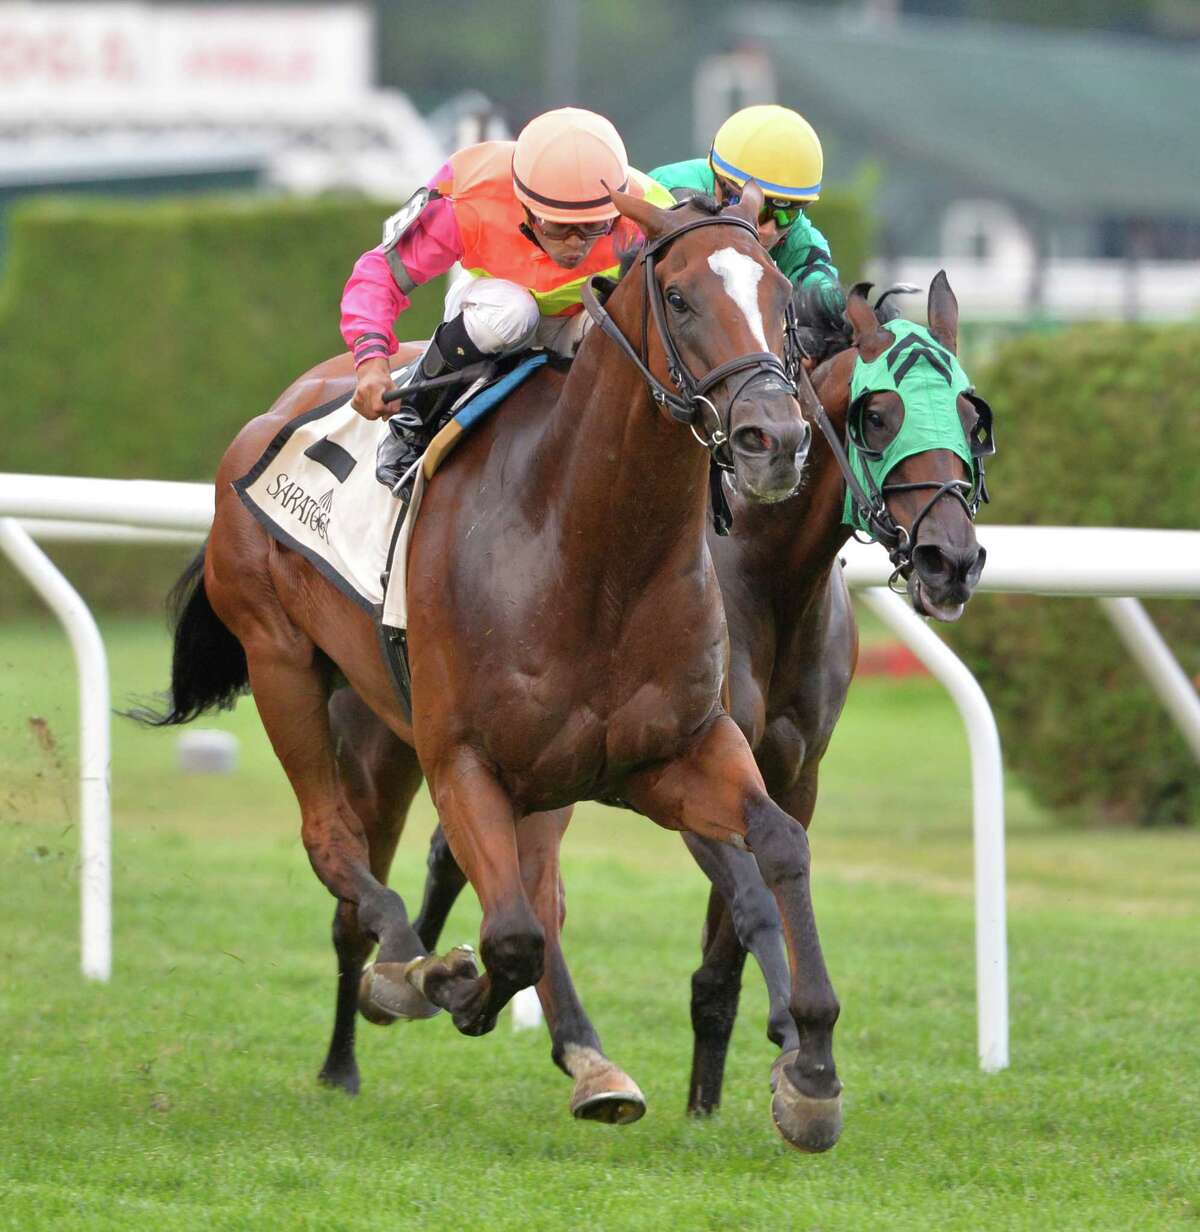 Grand Arch with jockey Luis Saez puts away the competition for the win in the Fourstardave stakes Saturday afternoon Aug. 15, 2015, at the Saratoga Race Course in Saratoga Springs, N.Y. (Skip Dickstein/Times Union)